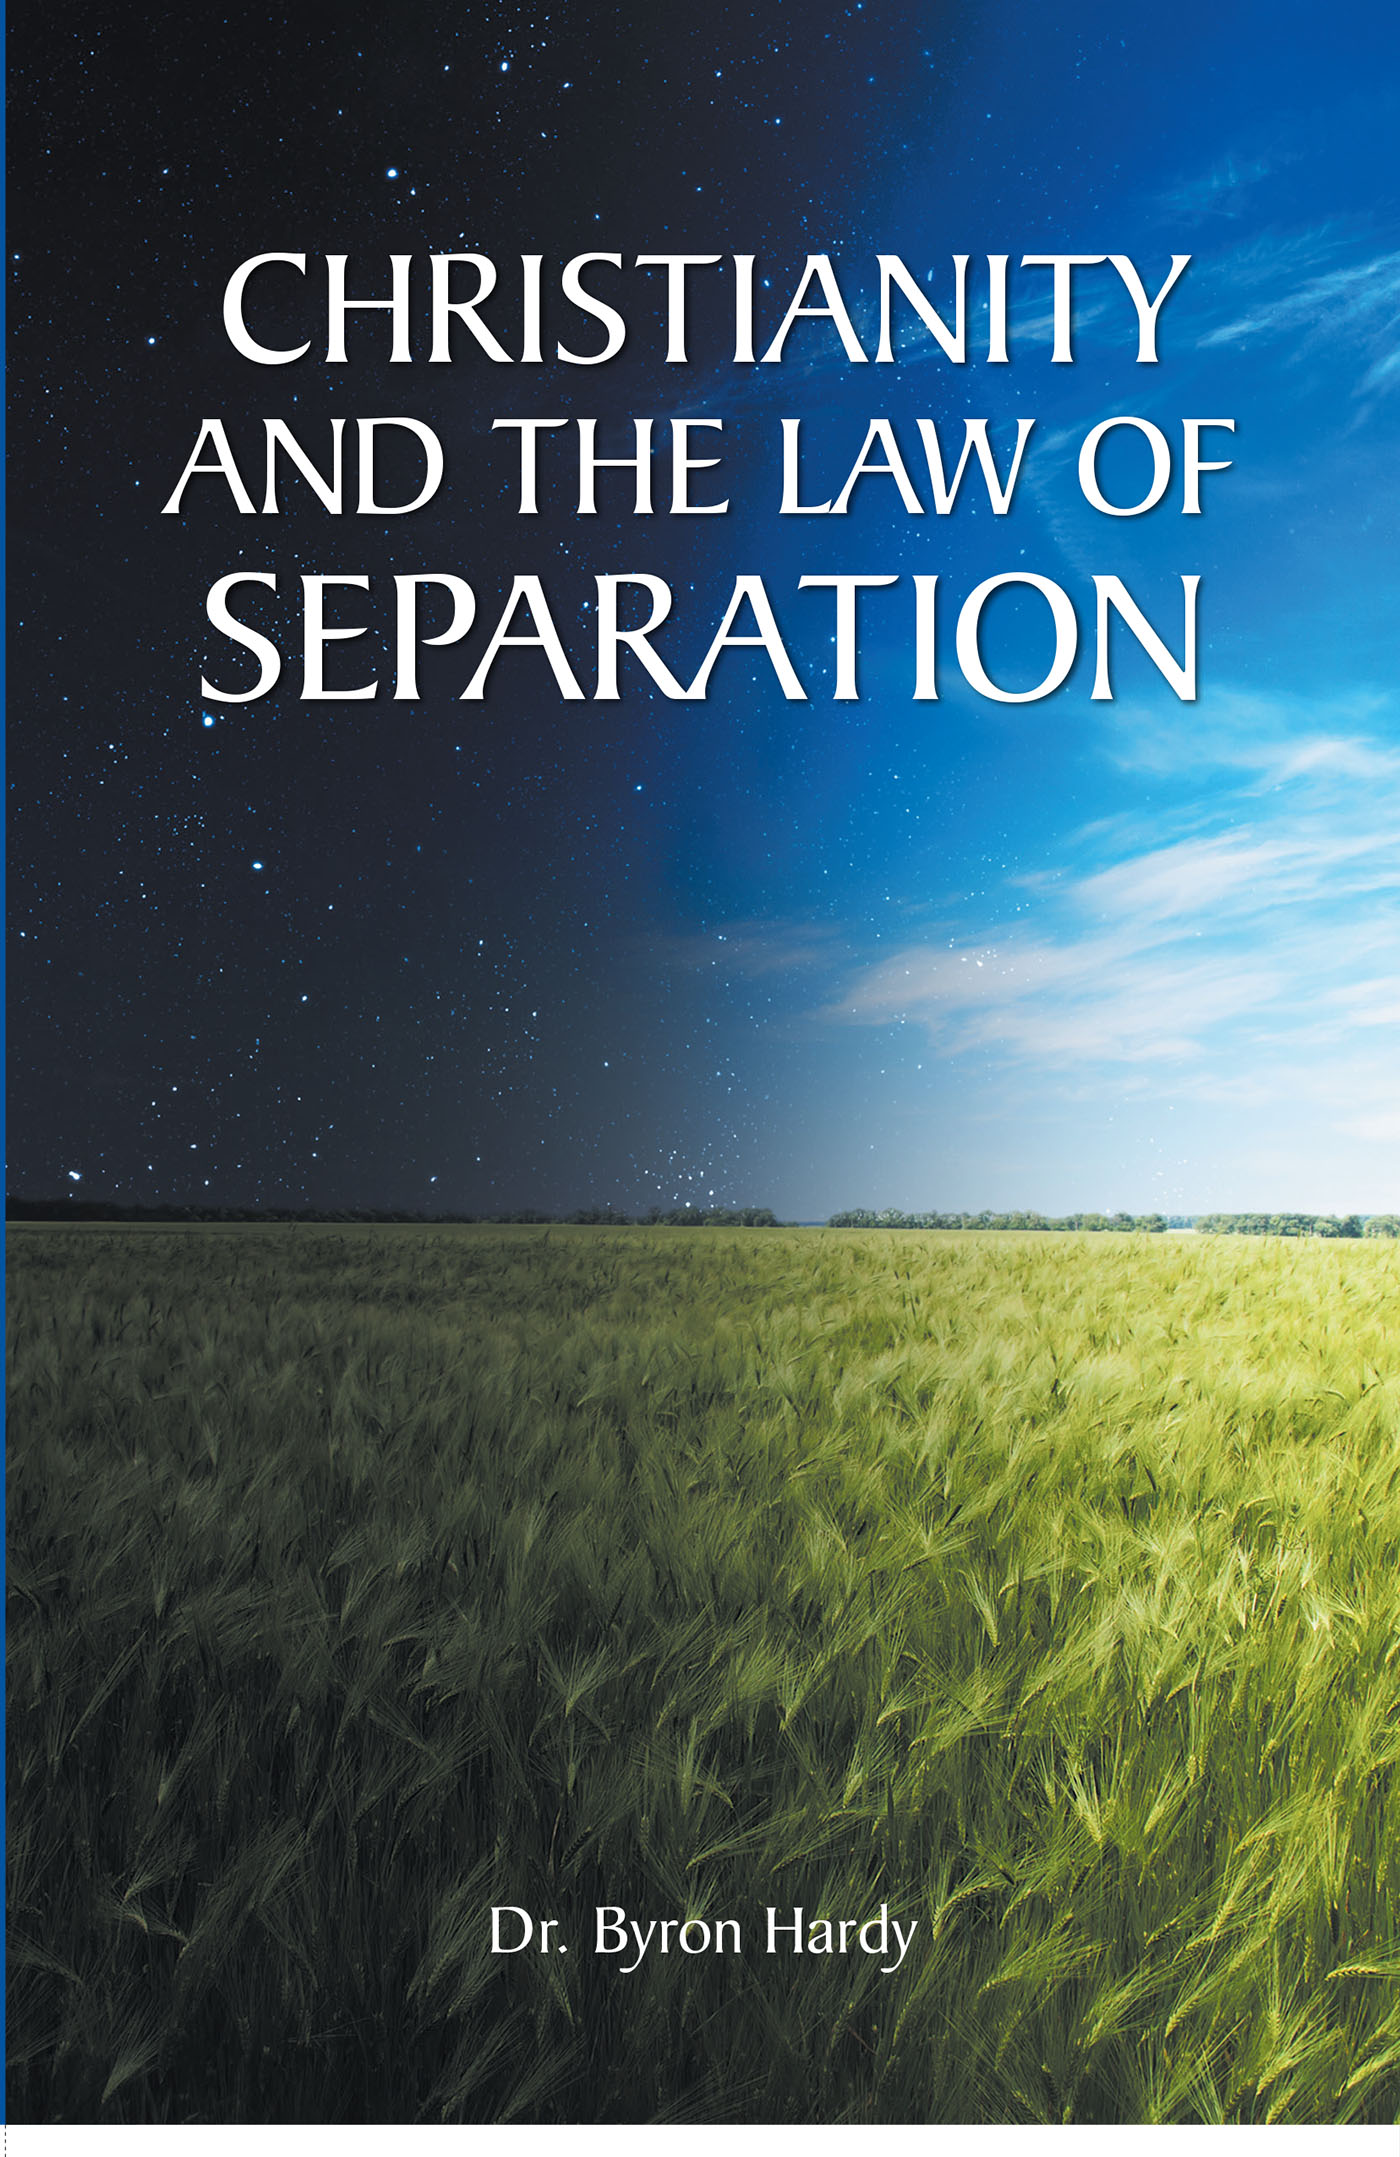 Dr. Byron Hardy’s Newly Released "Christianity and the Law of Separation" is a Thoughtful Discussion of the Need for a Return to the Basics of Faith